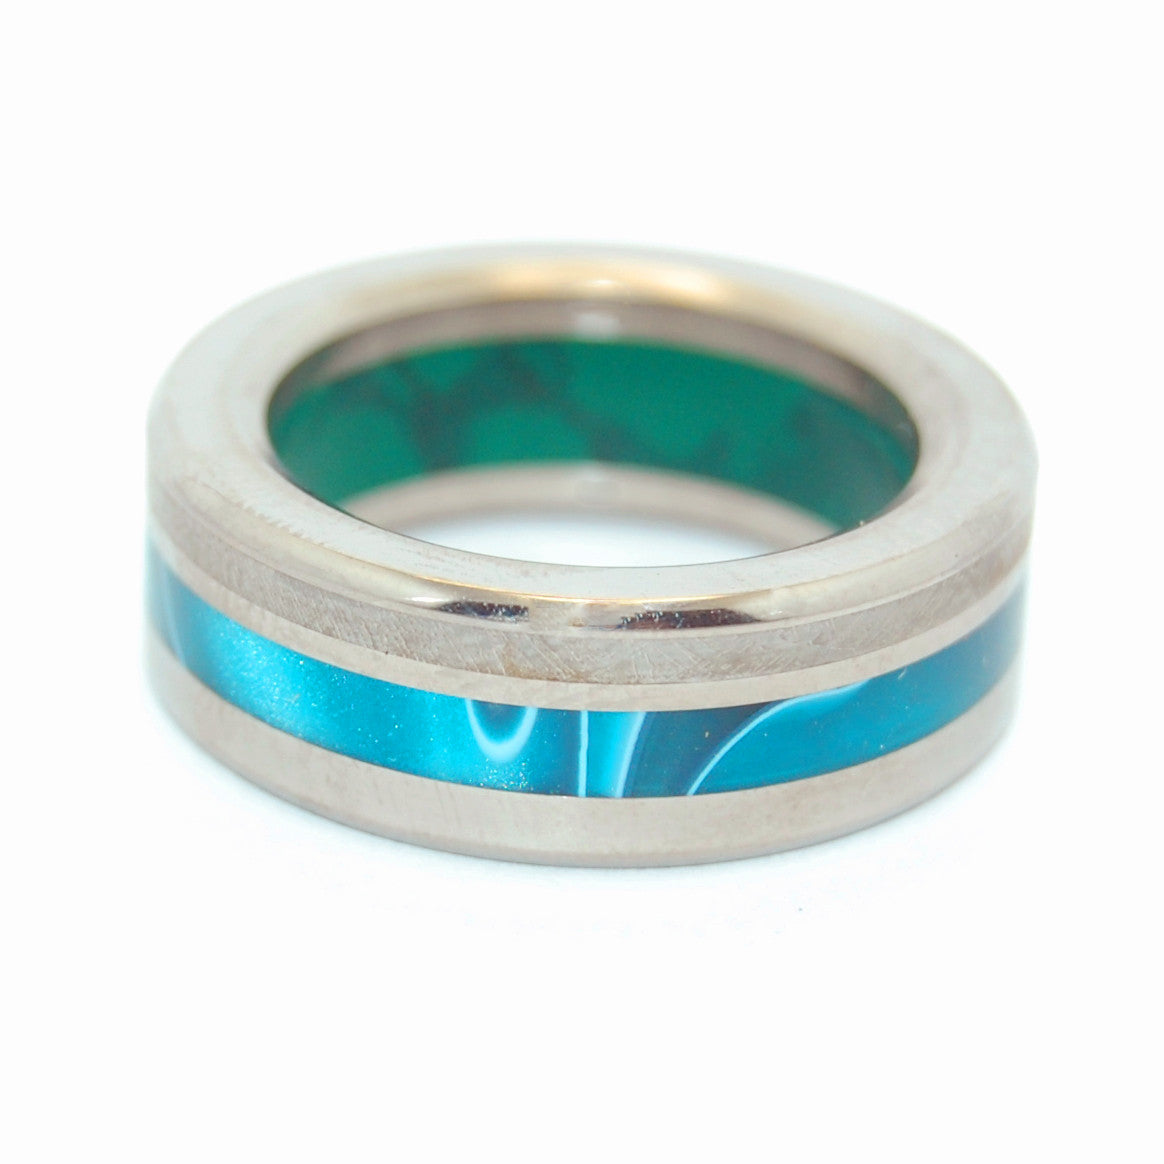 GO BOLD OR GO HOME | Meteorite & Jade Stone & Aquatic Blue Resin Unique Wedding Rings - Minter and Richter Designs